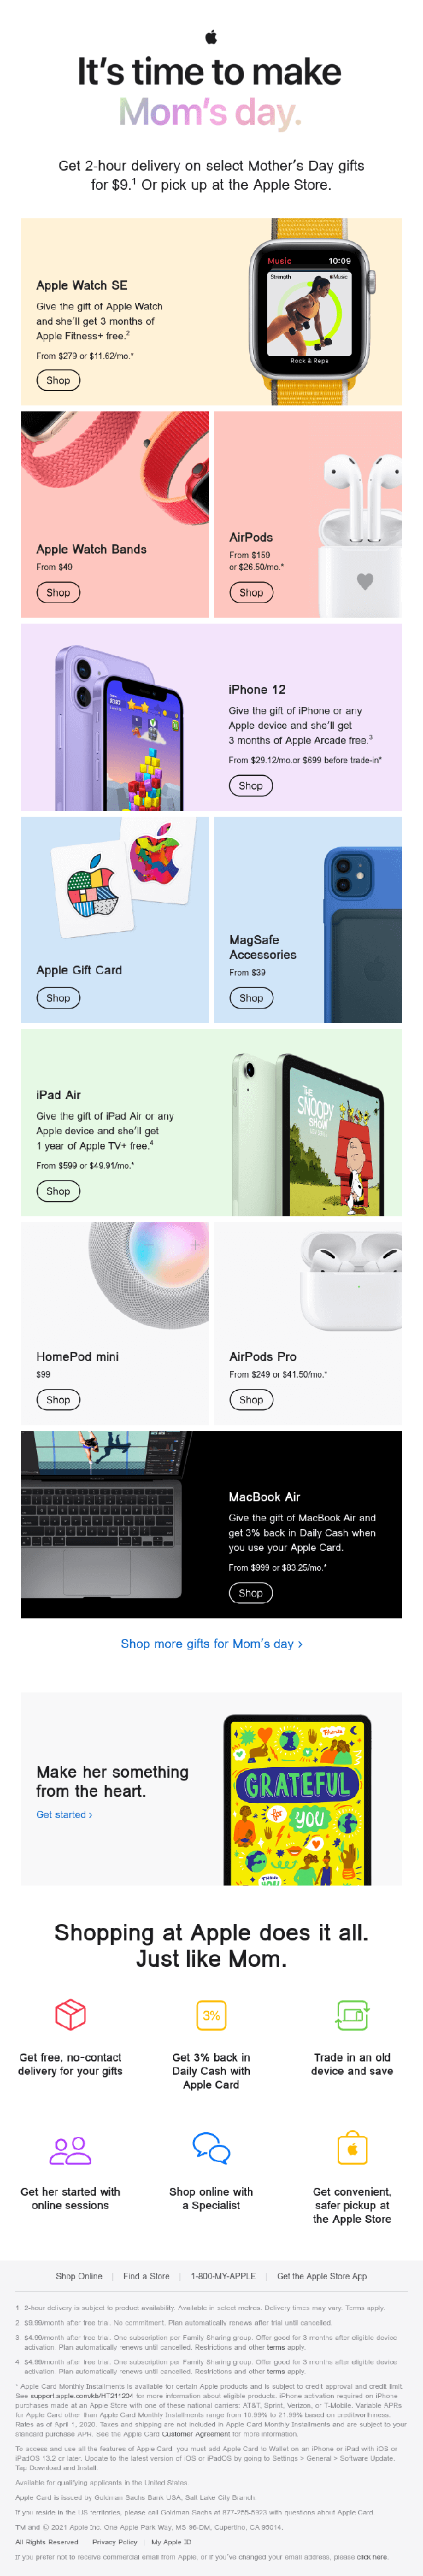 Apple-mother's day email